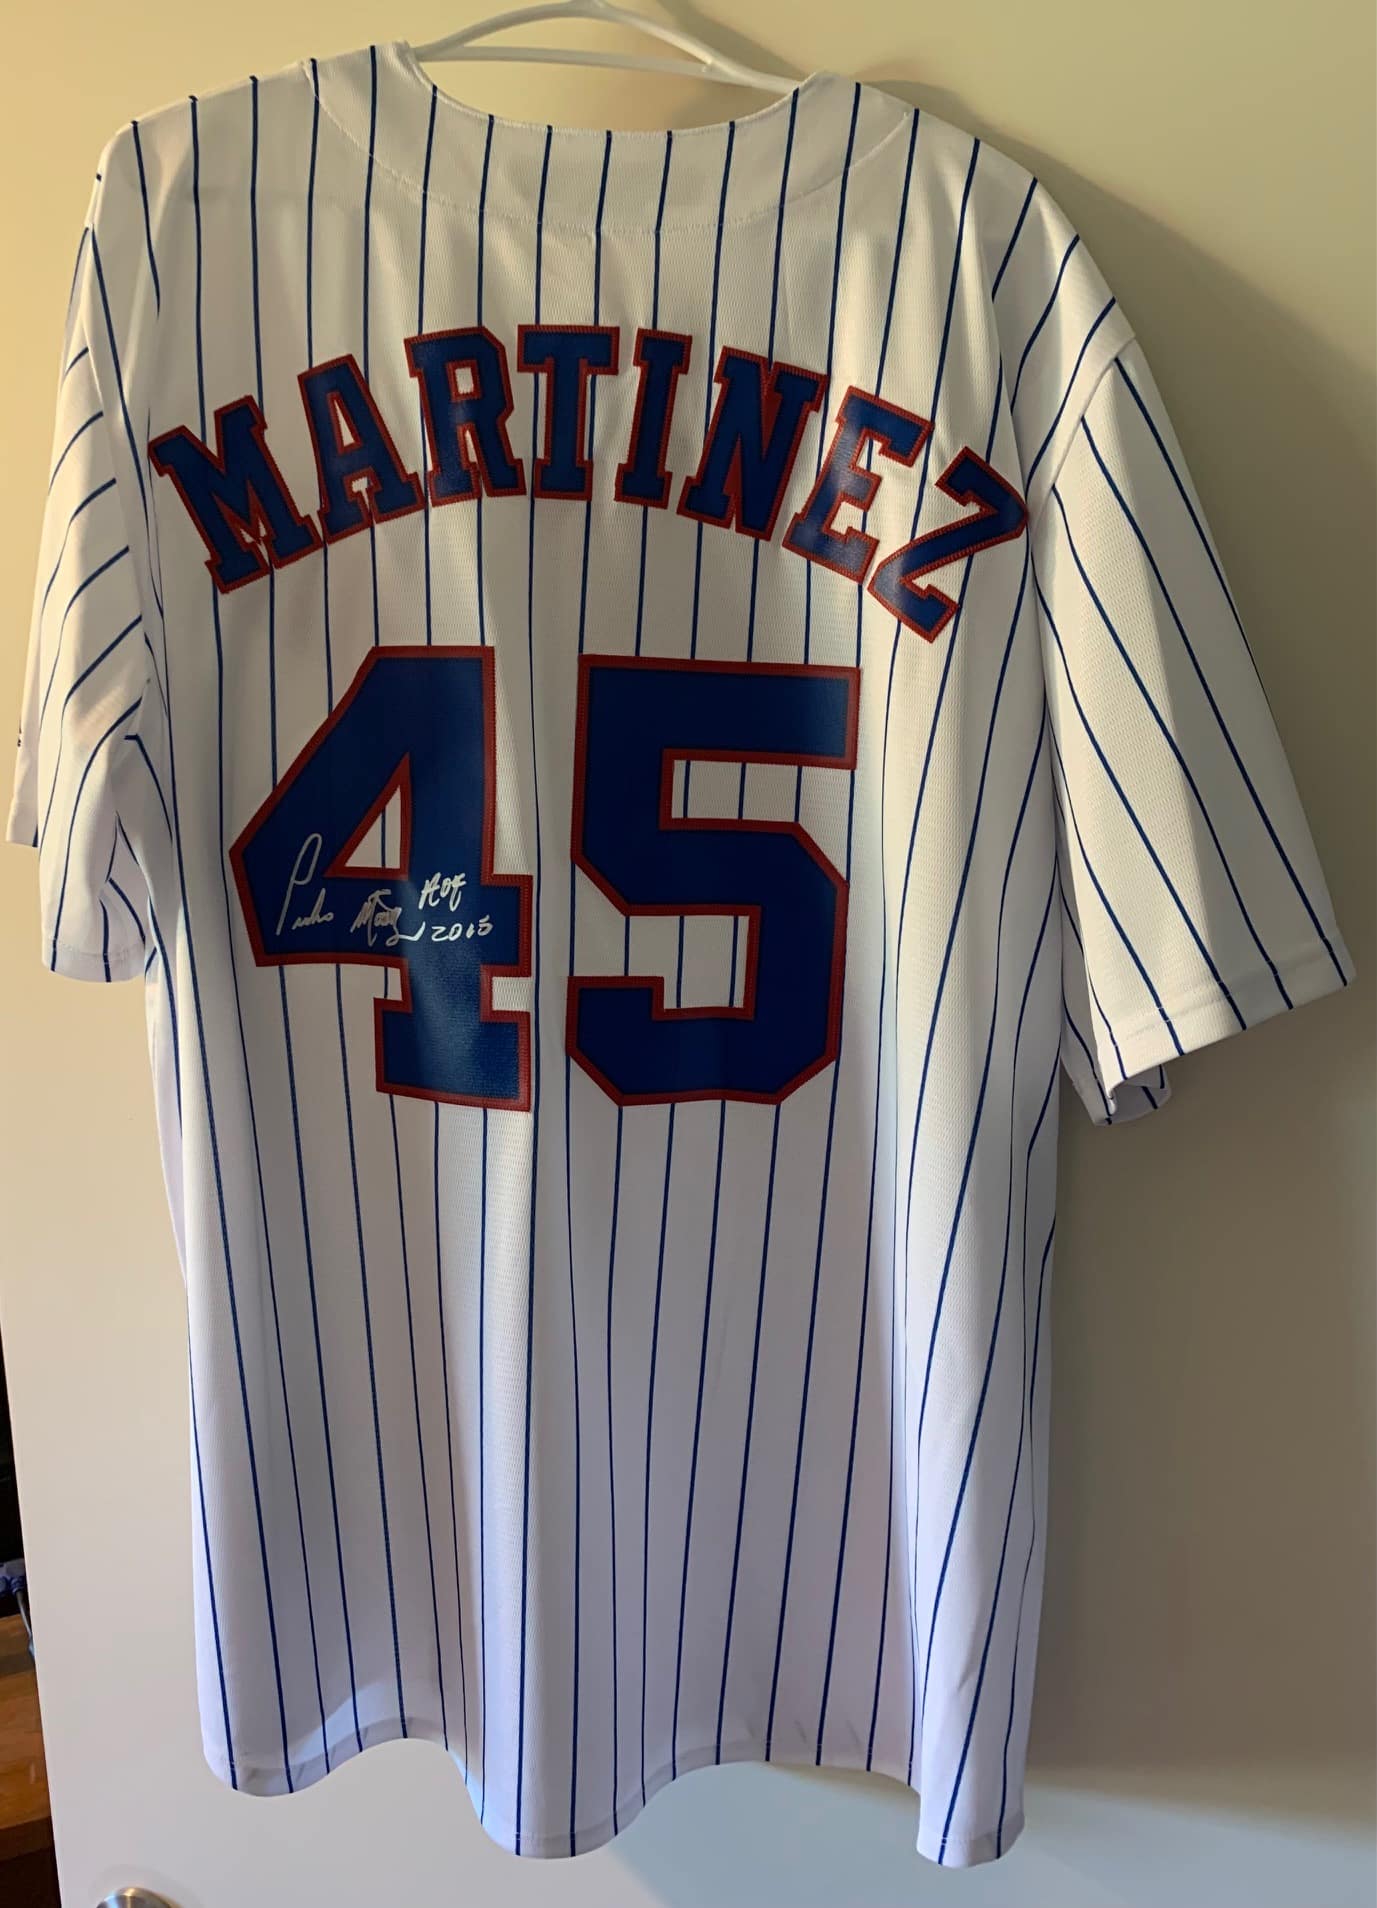 Pedro Martinez signed jersey - Canadian Baseball Hall of Fame and Museum